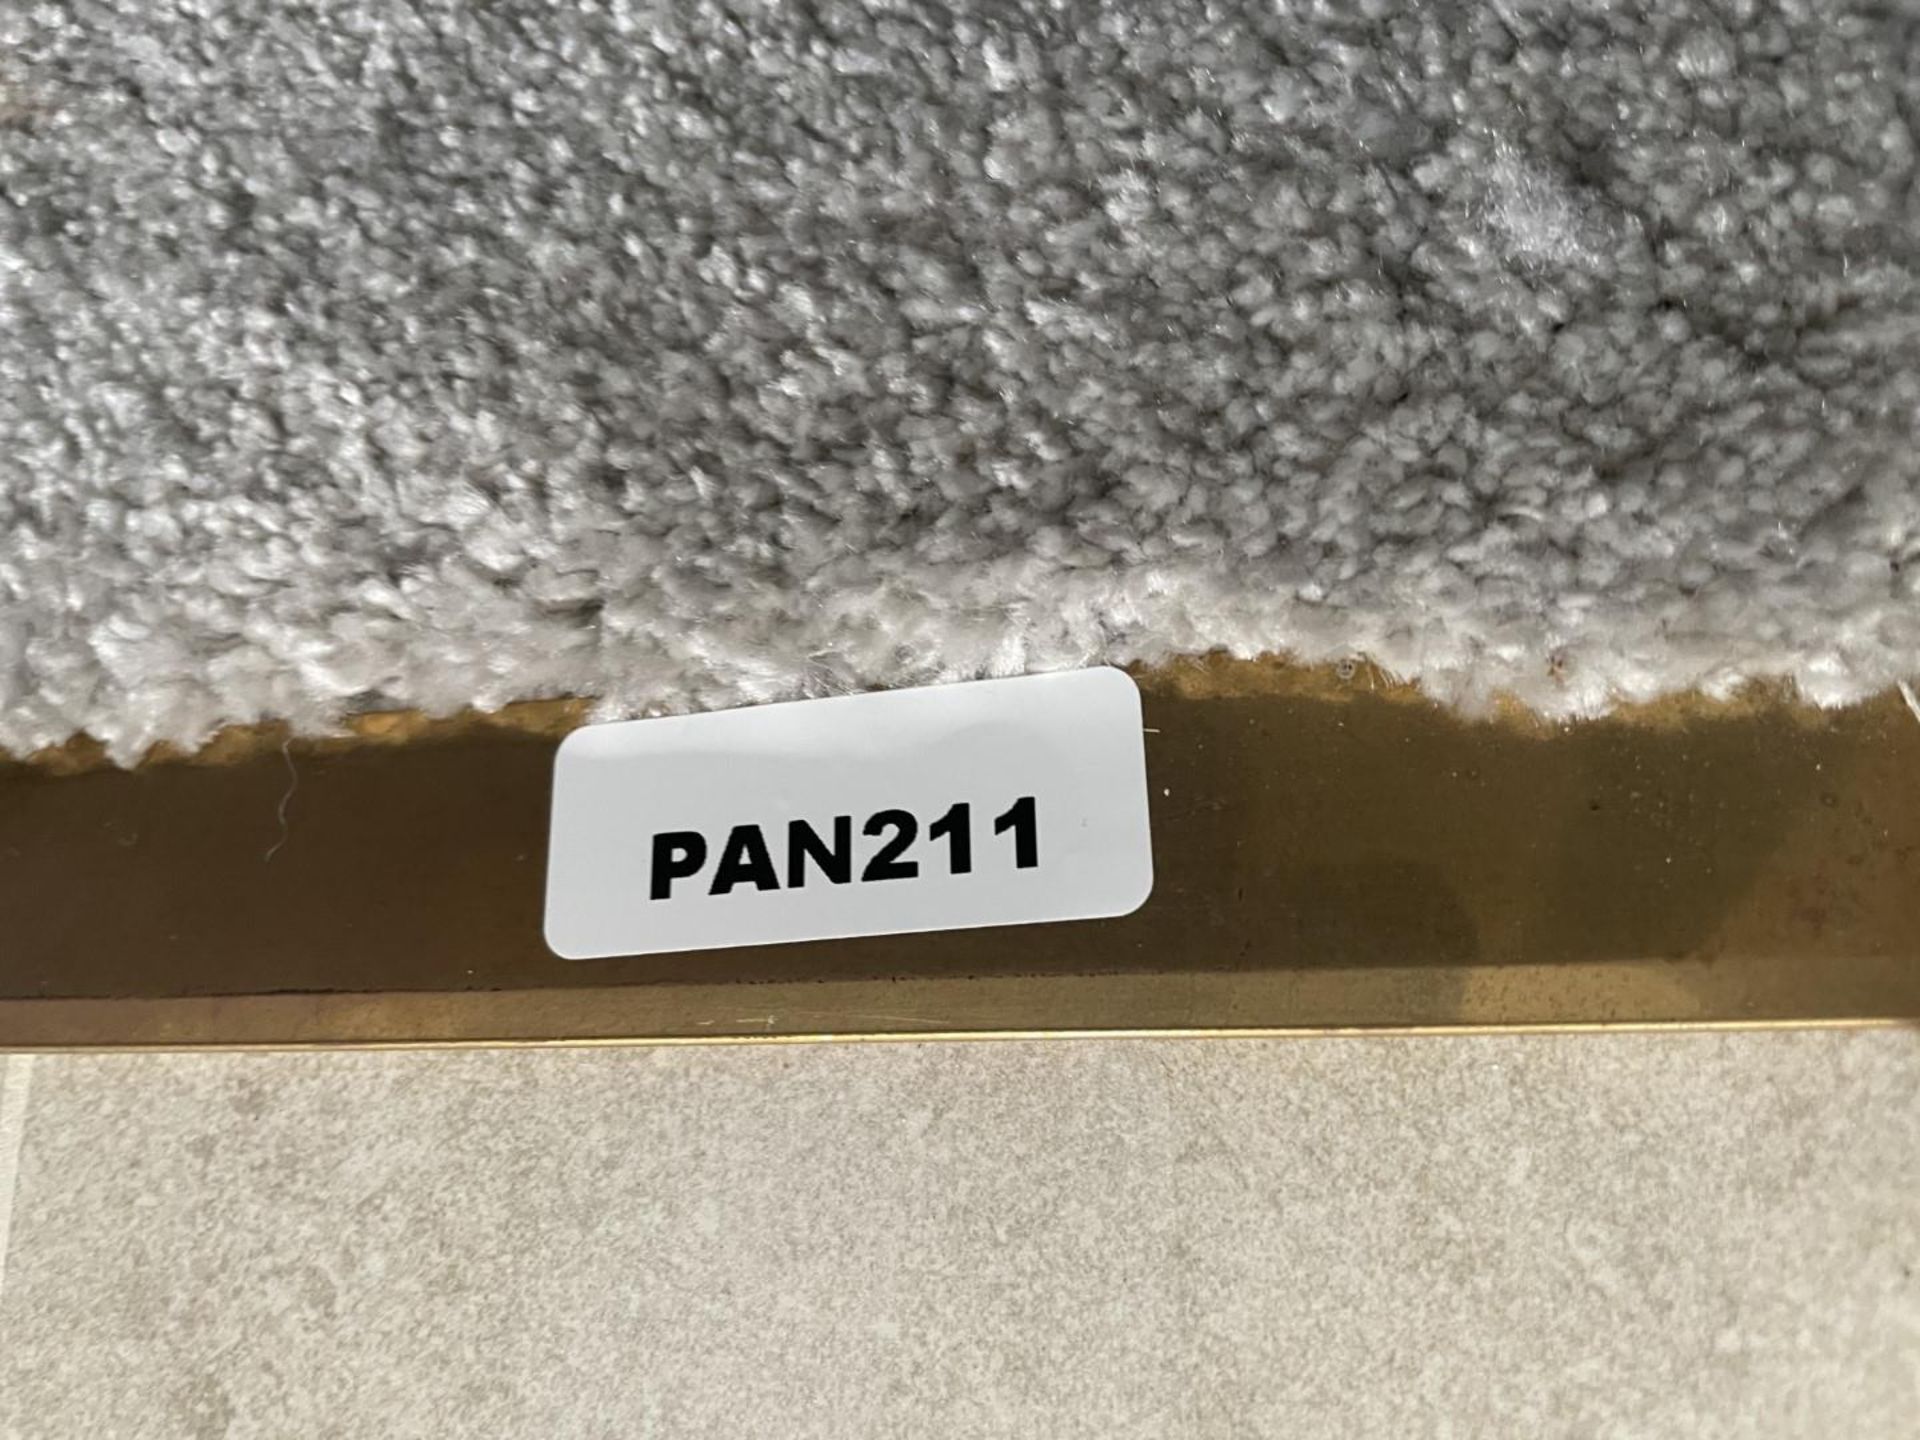 1 x Luxury Wool Downstairs Carpet in a Neutral Tone + Premium Underlay - Ref: PAN211 - CL896 - NO - Image 18 of 20